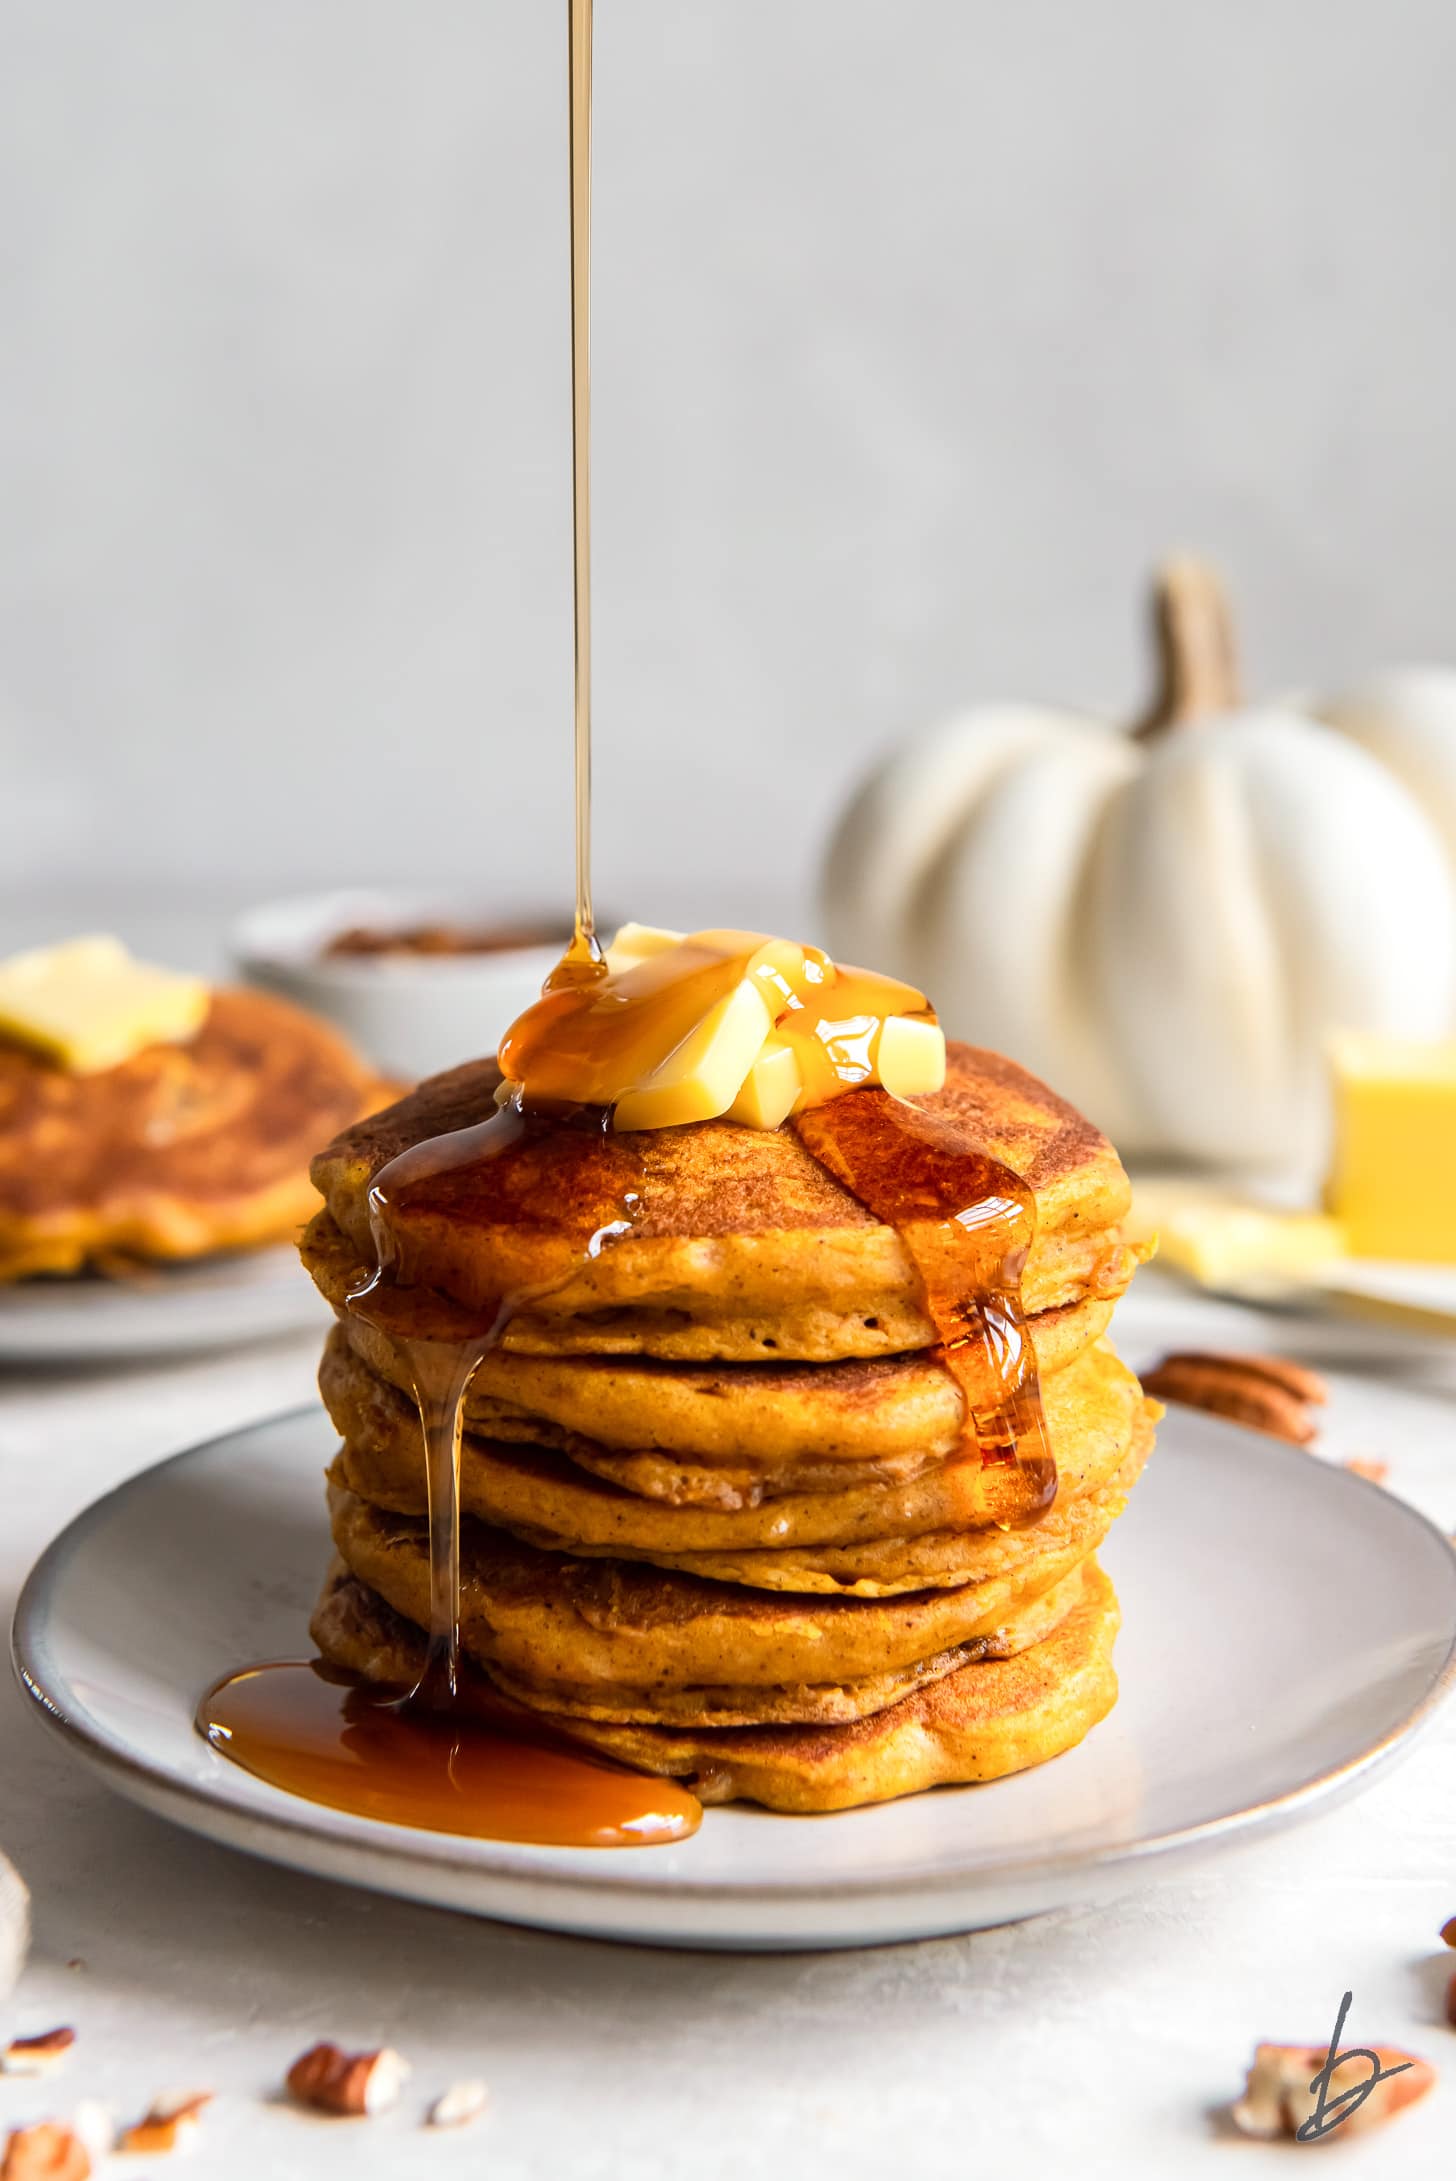 maple syrup poured on stack of fluffy pumpkin pancakes.